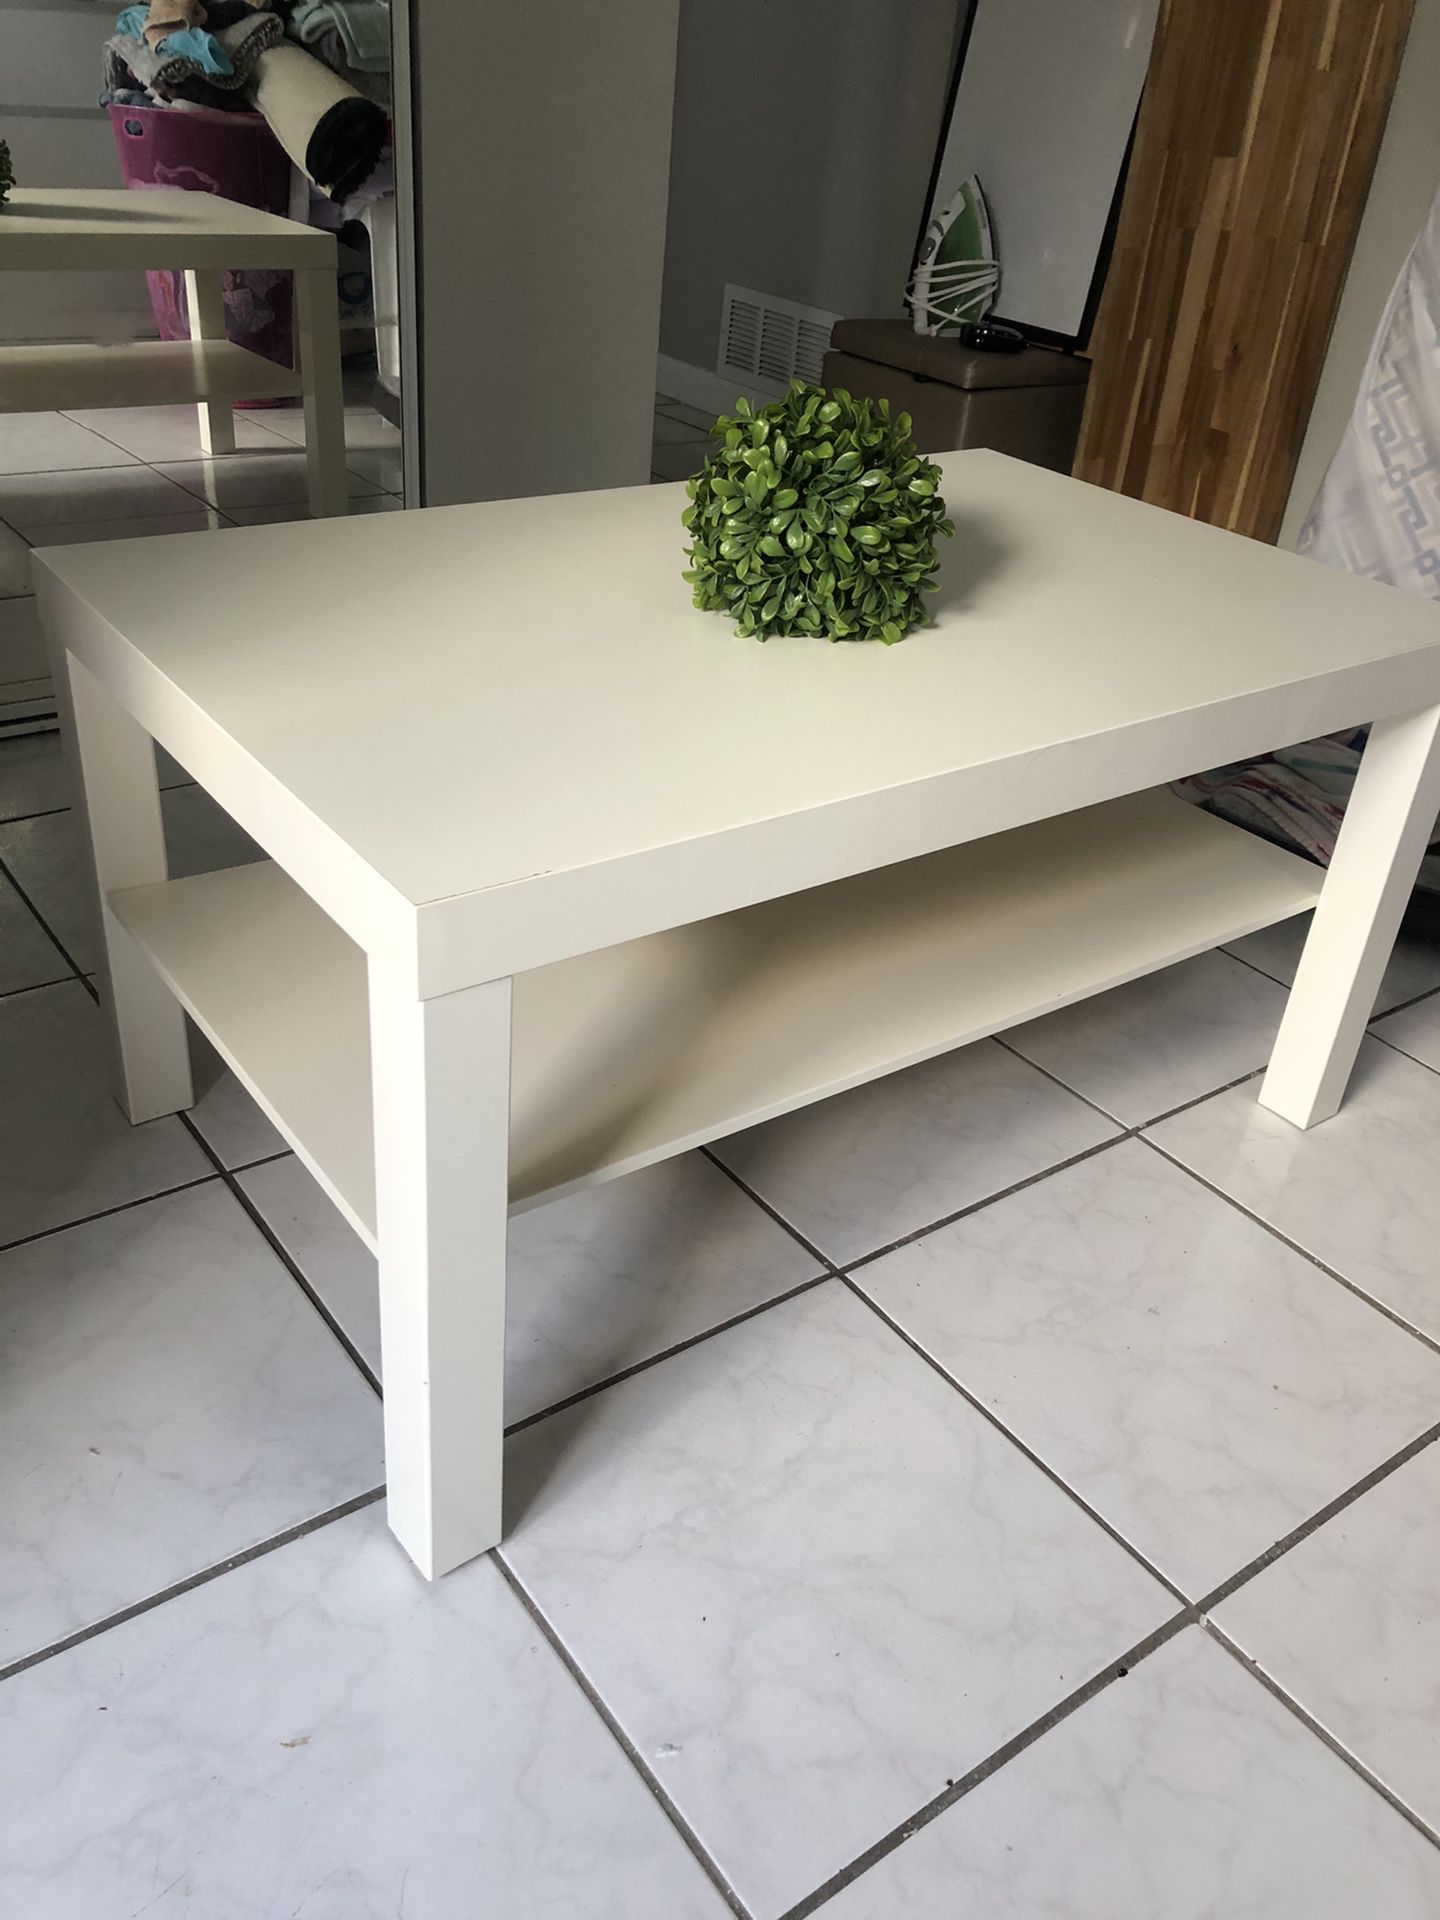 Coffee table from IKEA $20